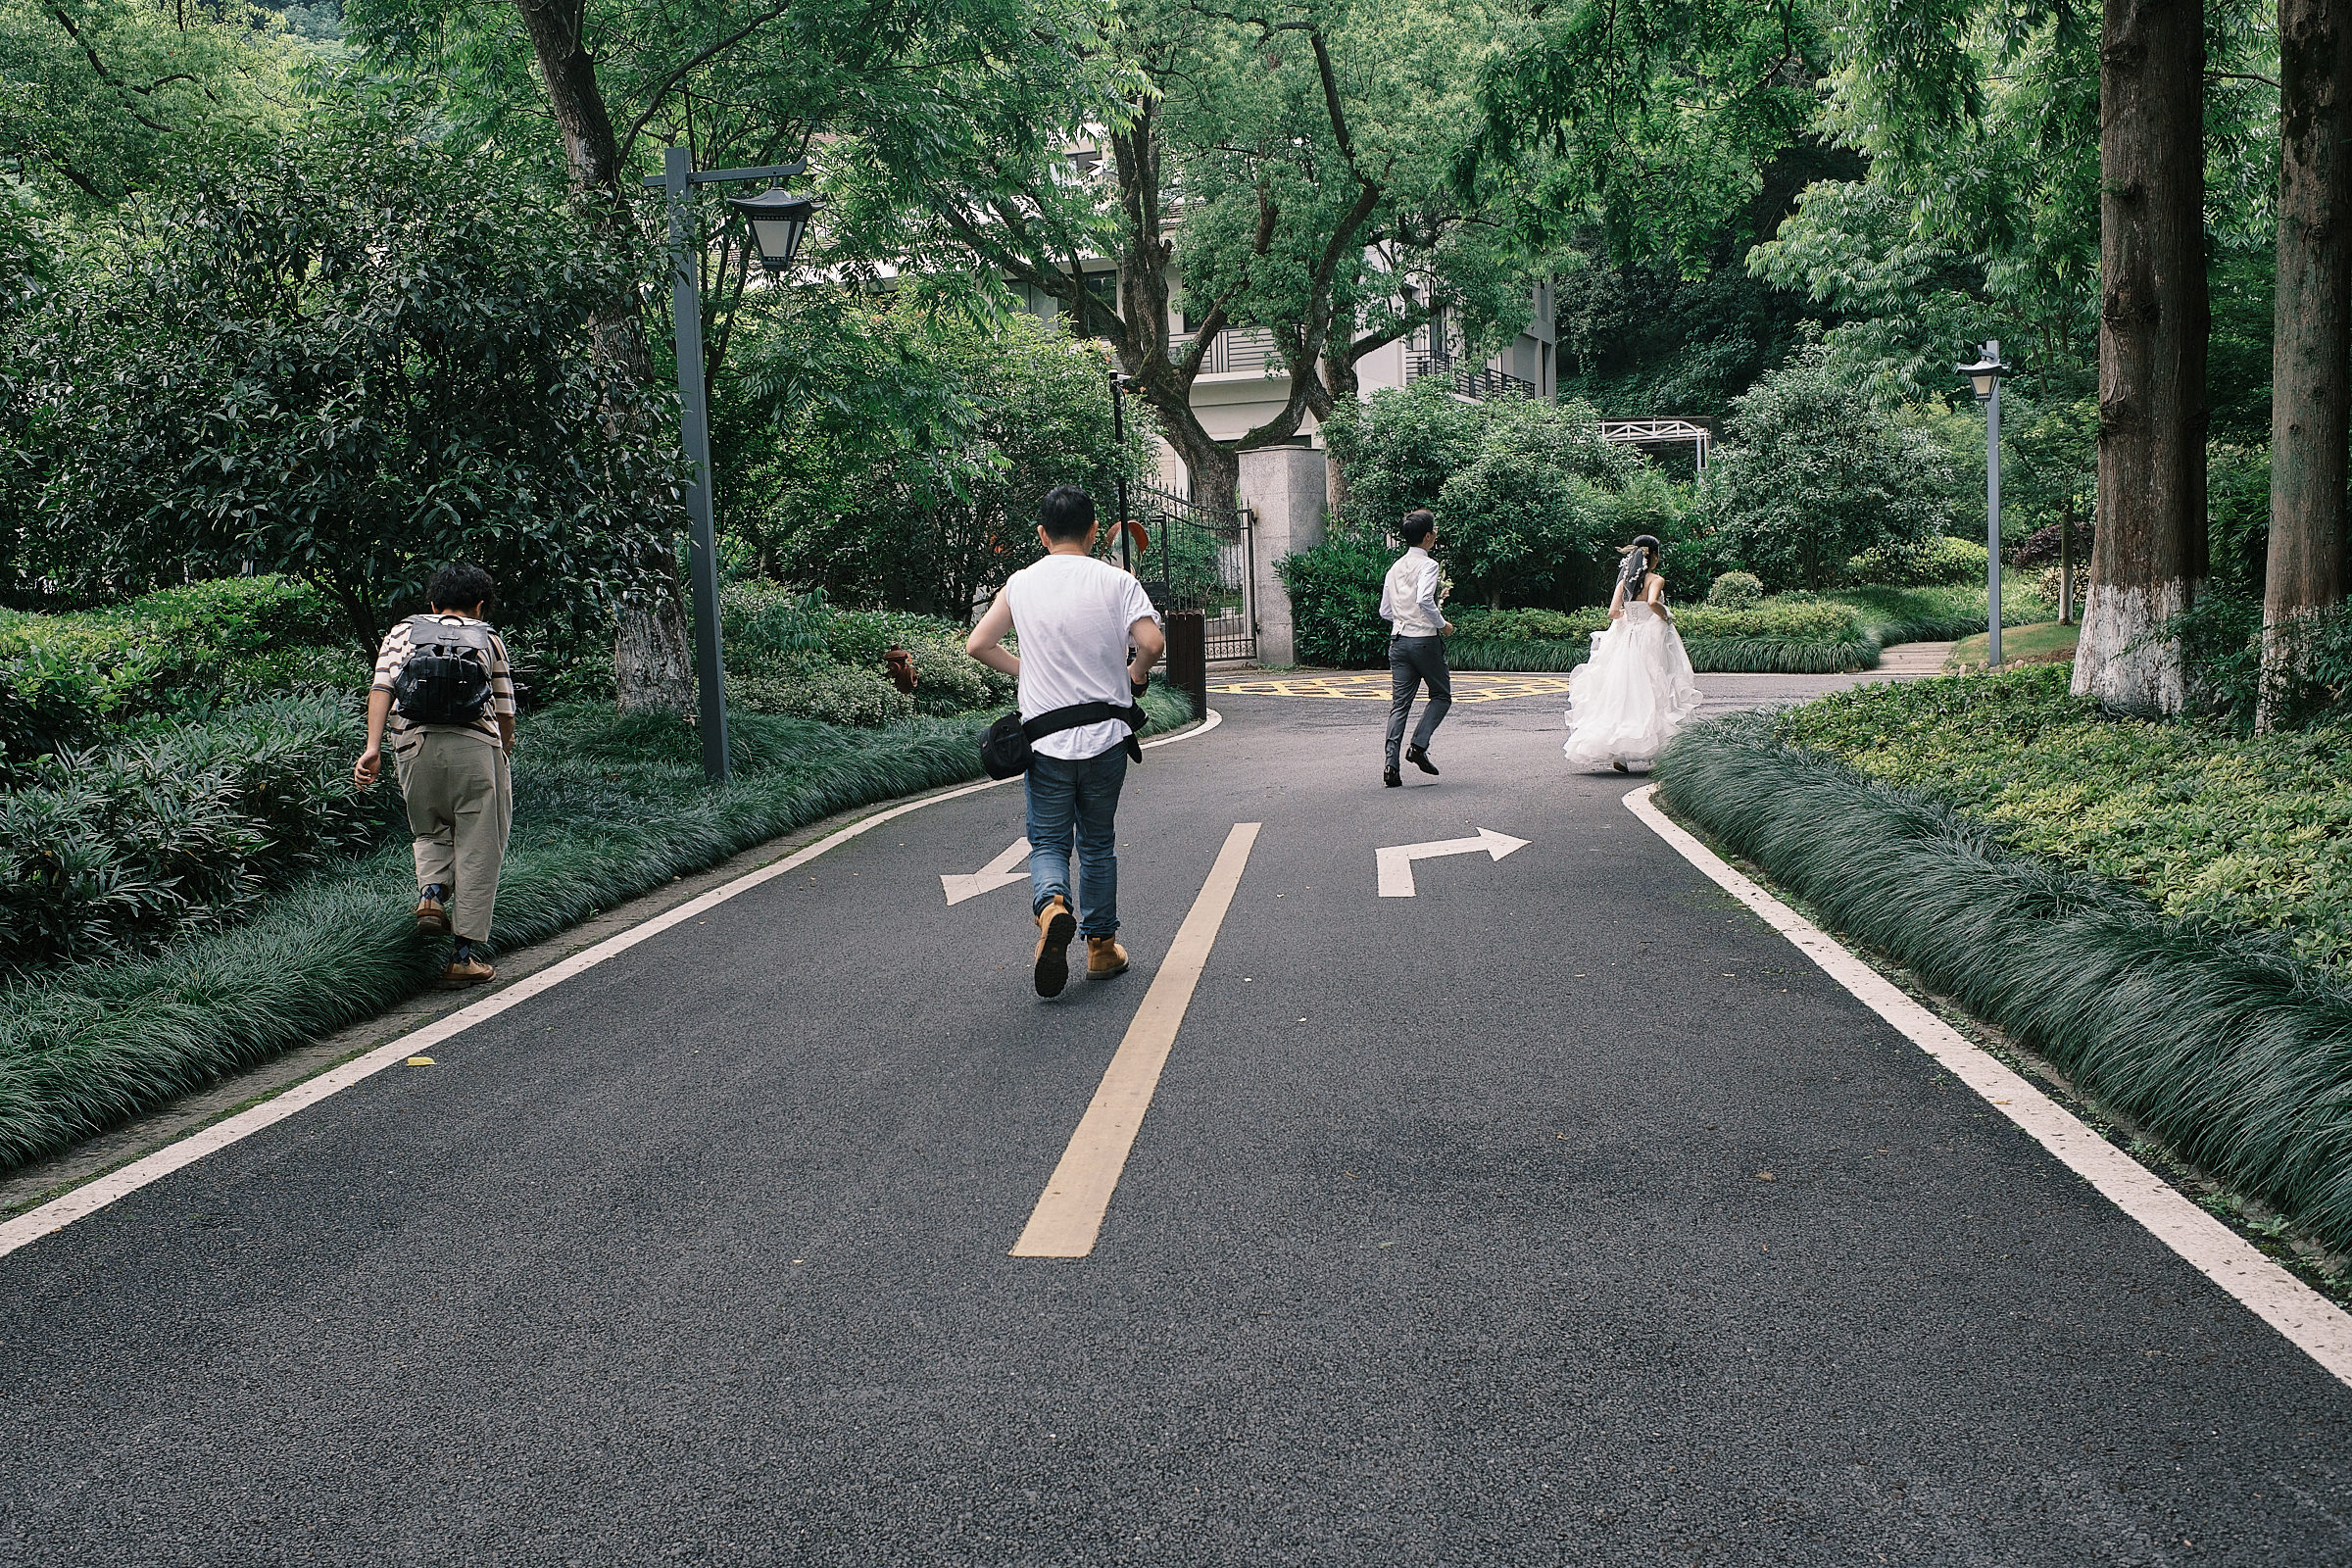 bride and groom run following arrows on the floor as videographer runs after them